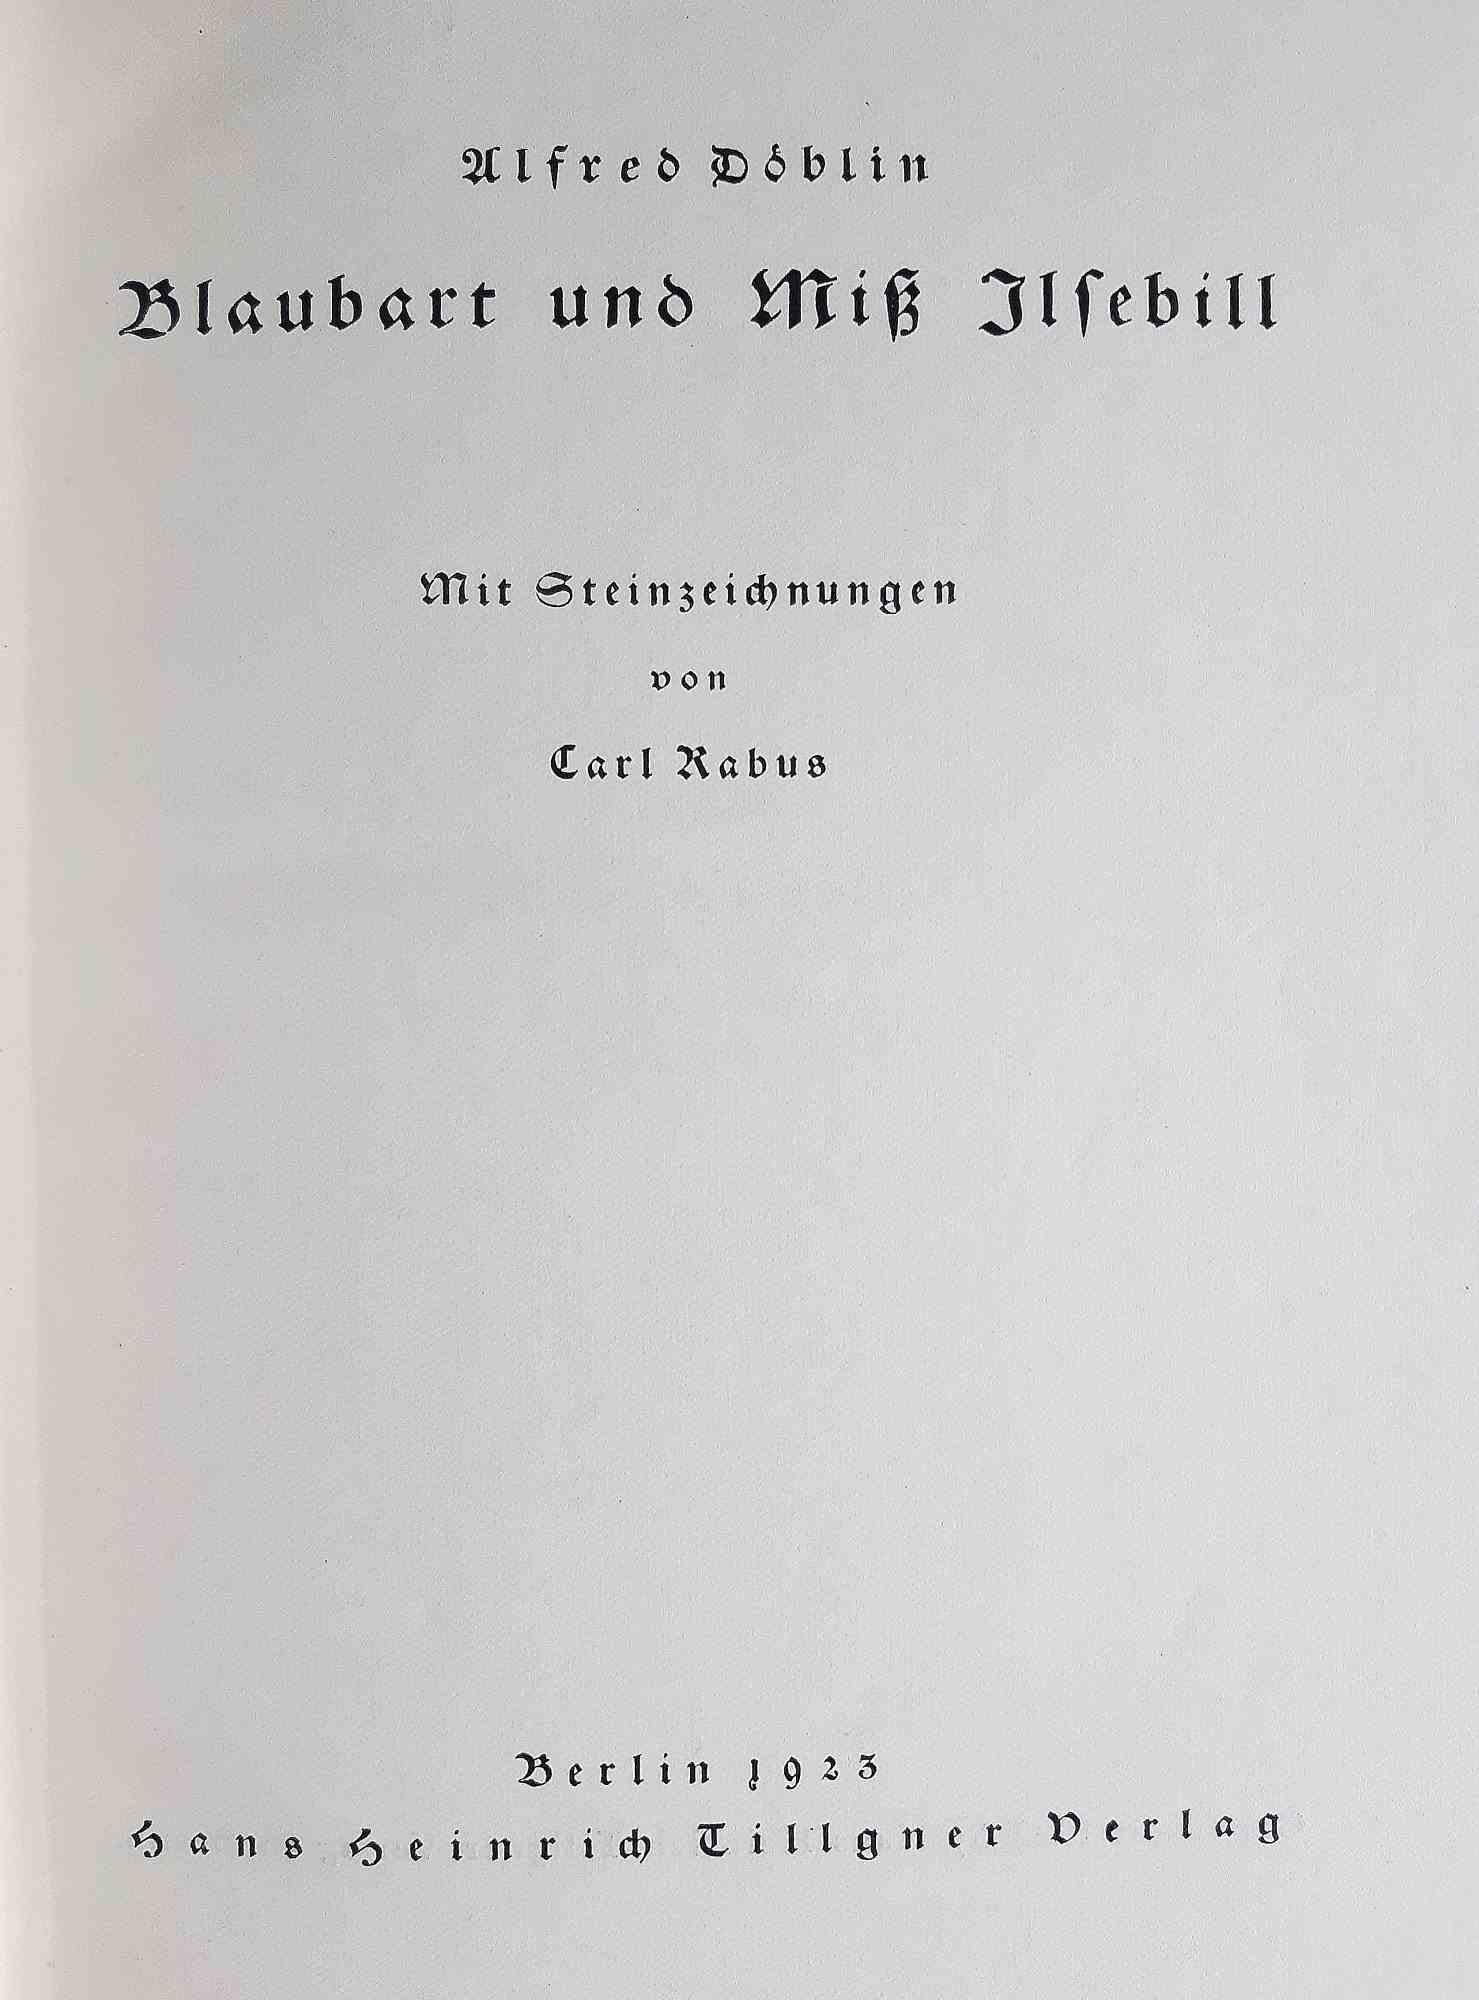 Blaubart und Miss Ilsebill is an original Rare Book illustrated by Carl Johann Rabus (May 30, 1898 – July 28, 1983) and written by Alfred Döblin (Stettin, 10 August 1878 - Emmendingen, 26 June 1957) in 1923.

Original First Edition.

Published by